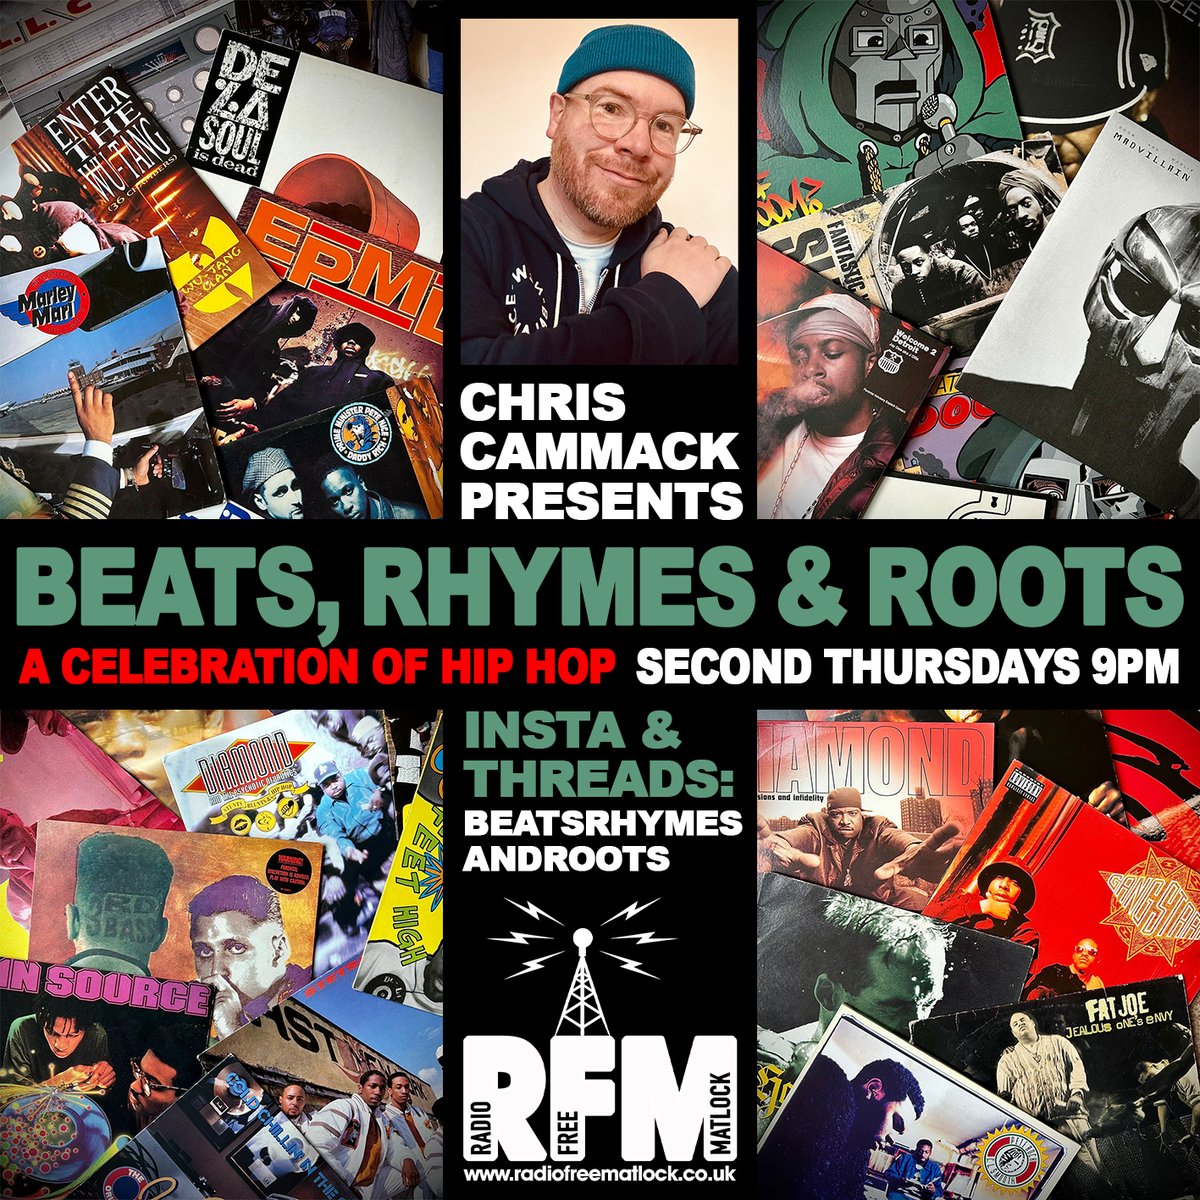 TONIGHT on RFM ⚡️ 7pm-9 : 'Sound Waves' with @mixless. A melting pot of music old and new from across the spectrum 9pm-11 : 'Beats, Rhymes & Roots' with Chris Cammack + guest mix from 'Flatline' Tune in >> radiofreematlock.co.uk / Alexa / smart radio / simple radio app